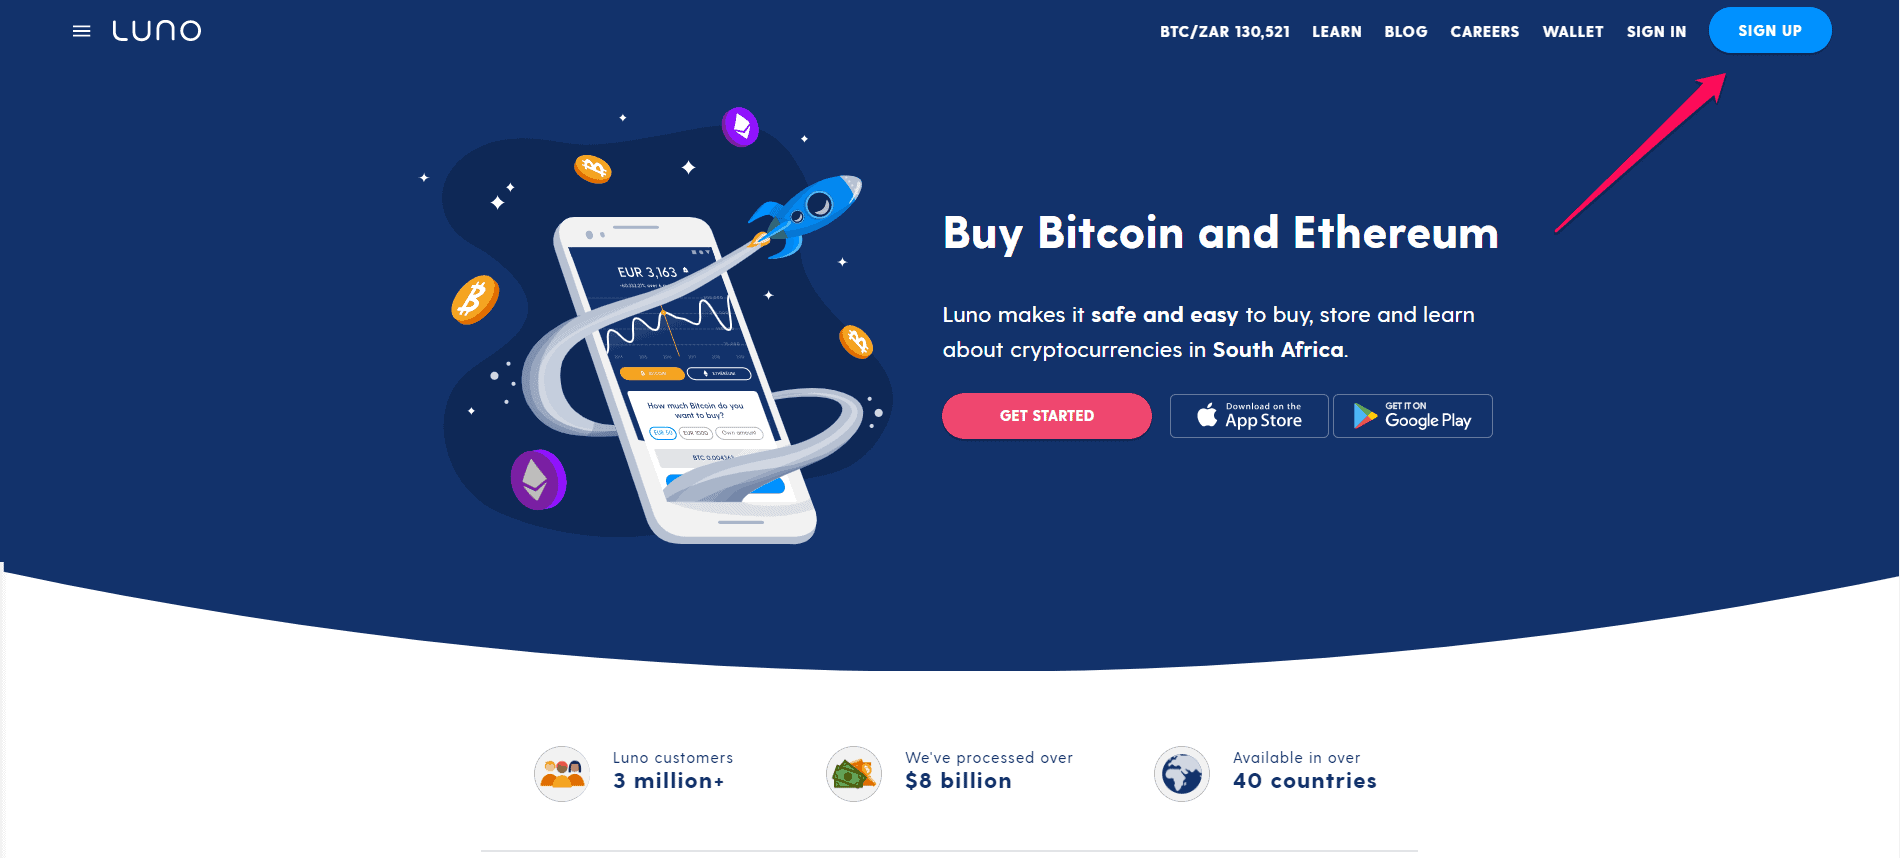 Luno: Platform for Buying and Selling Bitcoin | Hyperbitcoinization | bitcoinhelp.fun